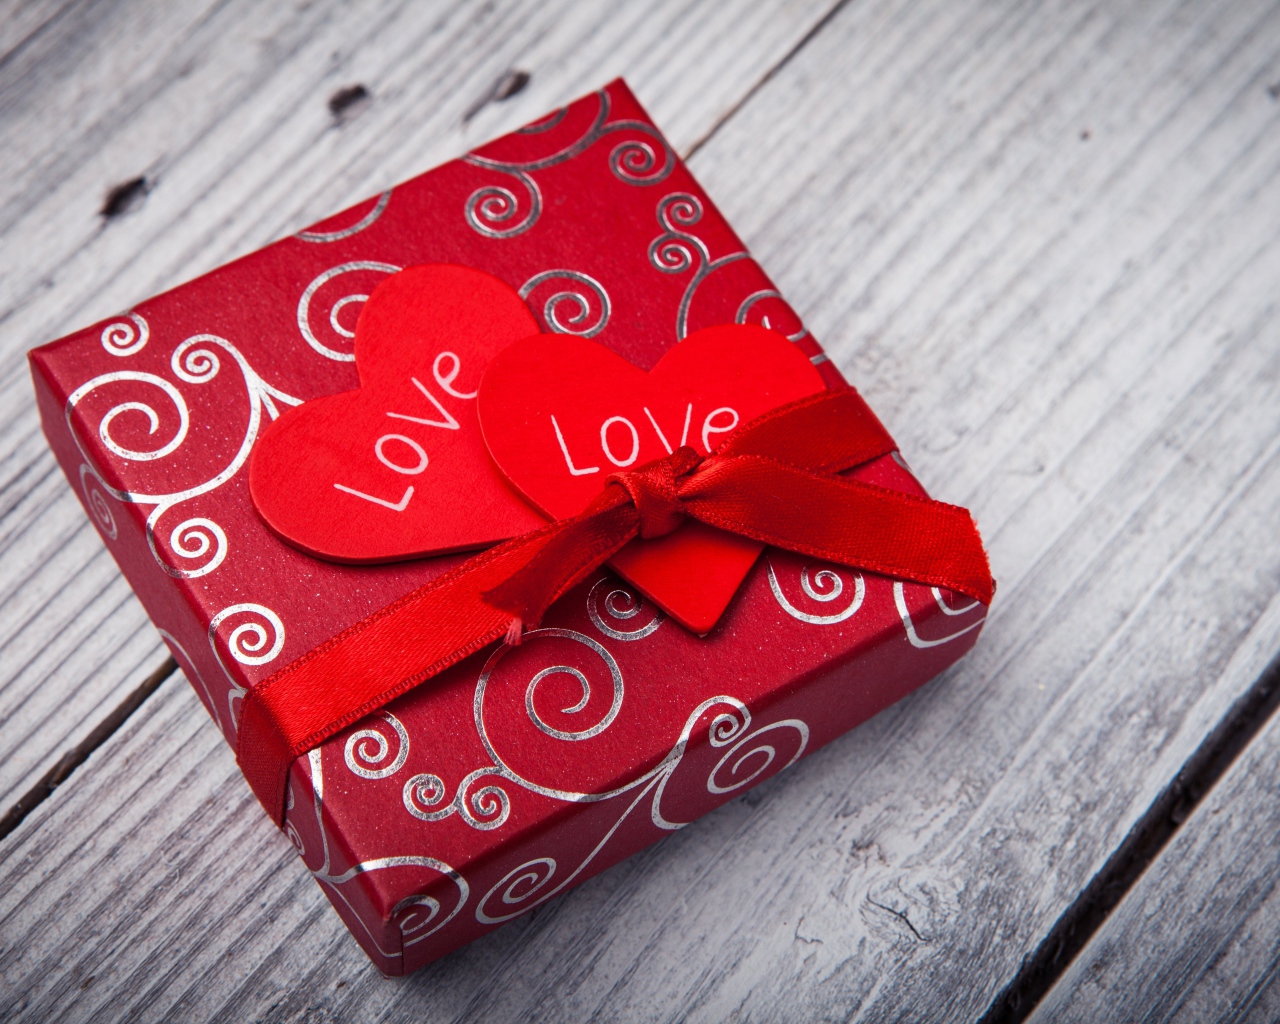 Gift with red hearts on a wooden table